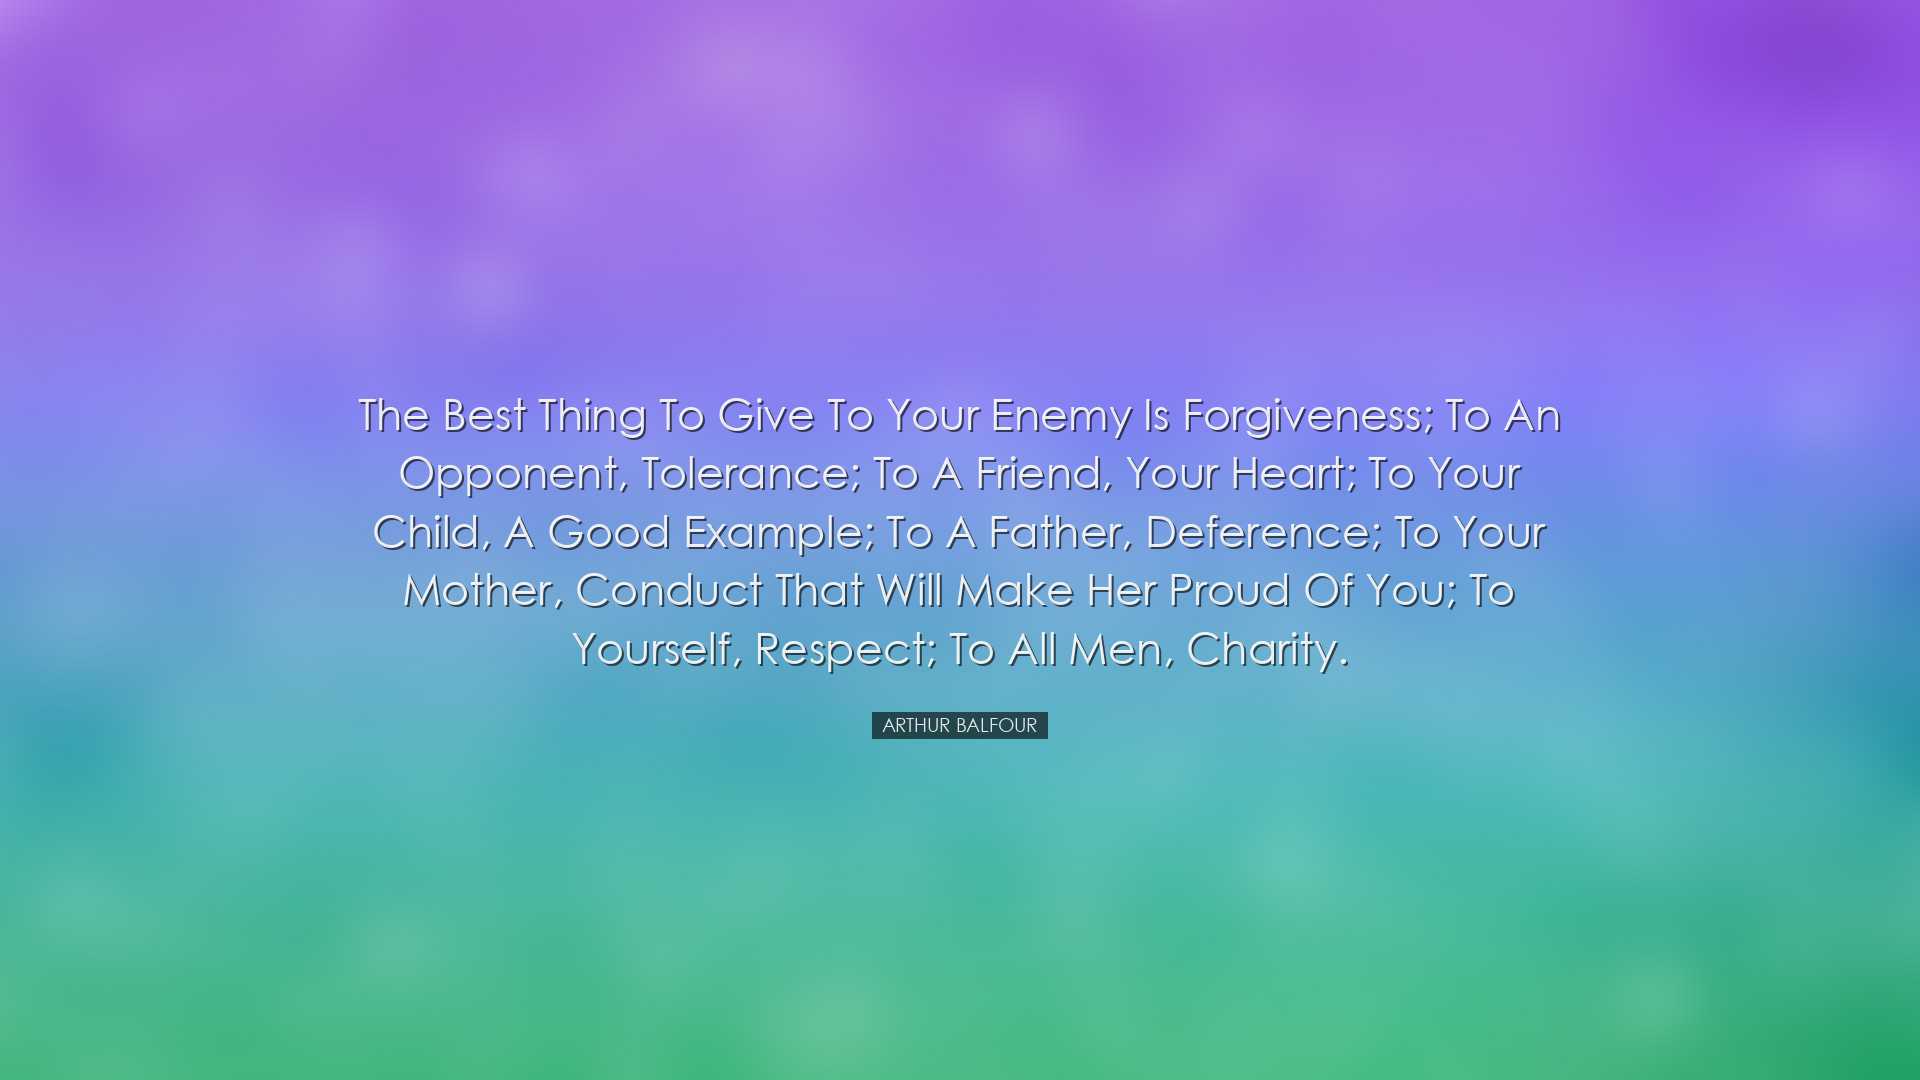 The best thing to give to your enemy is forgiveness; to an opponen